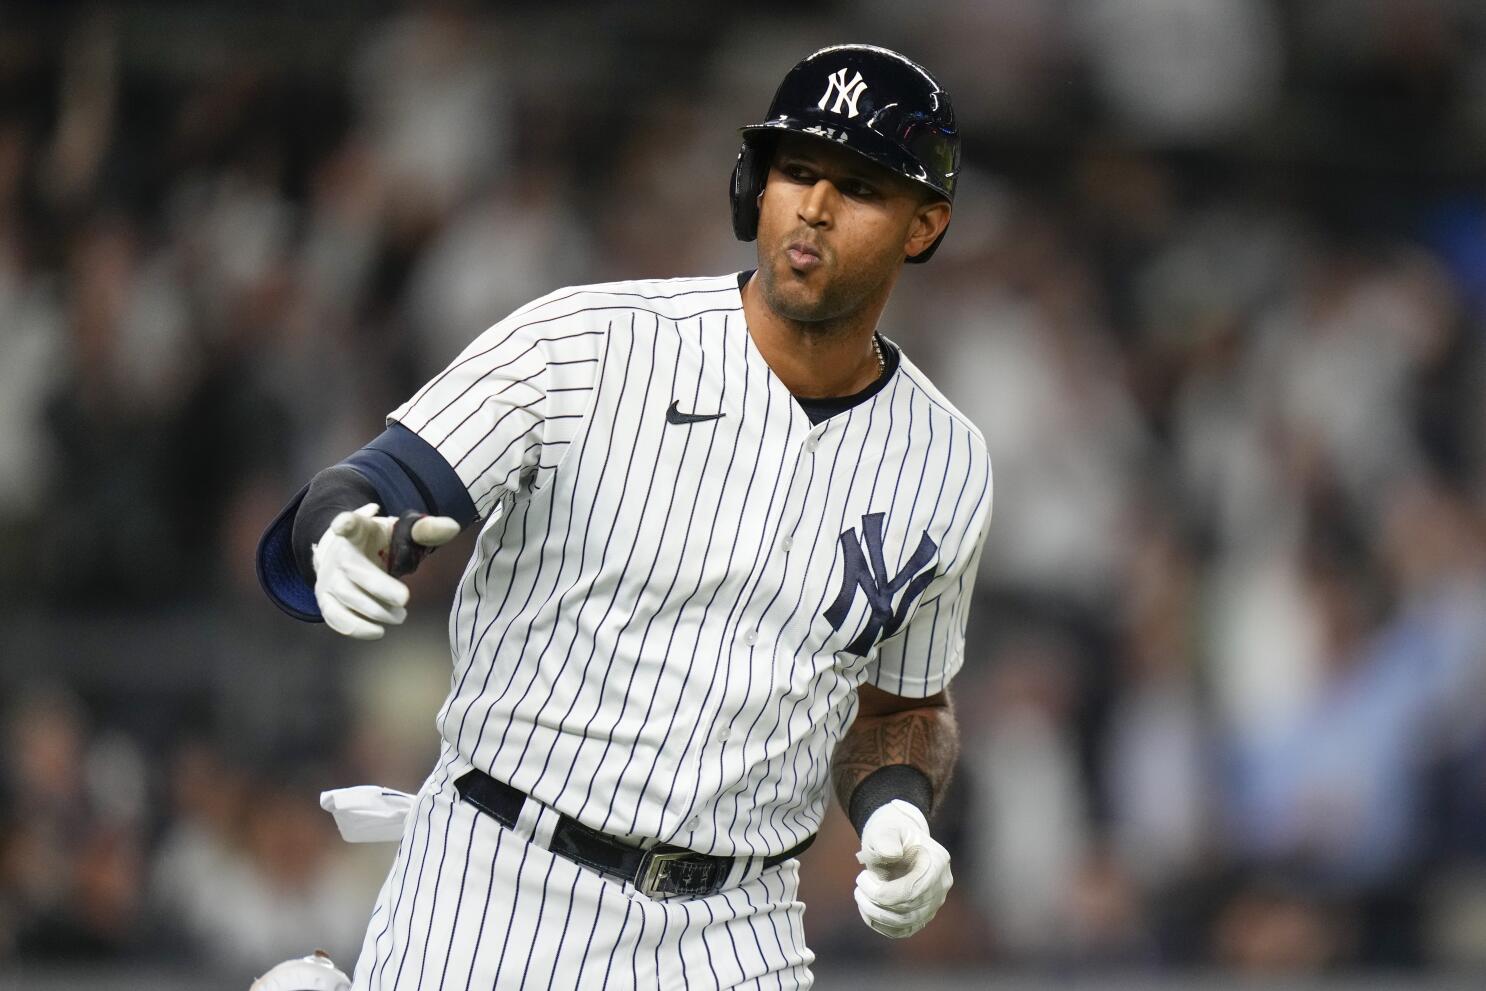 He's going to be a star' -- Former Yankees outfielder to join